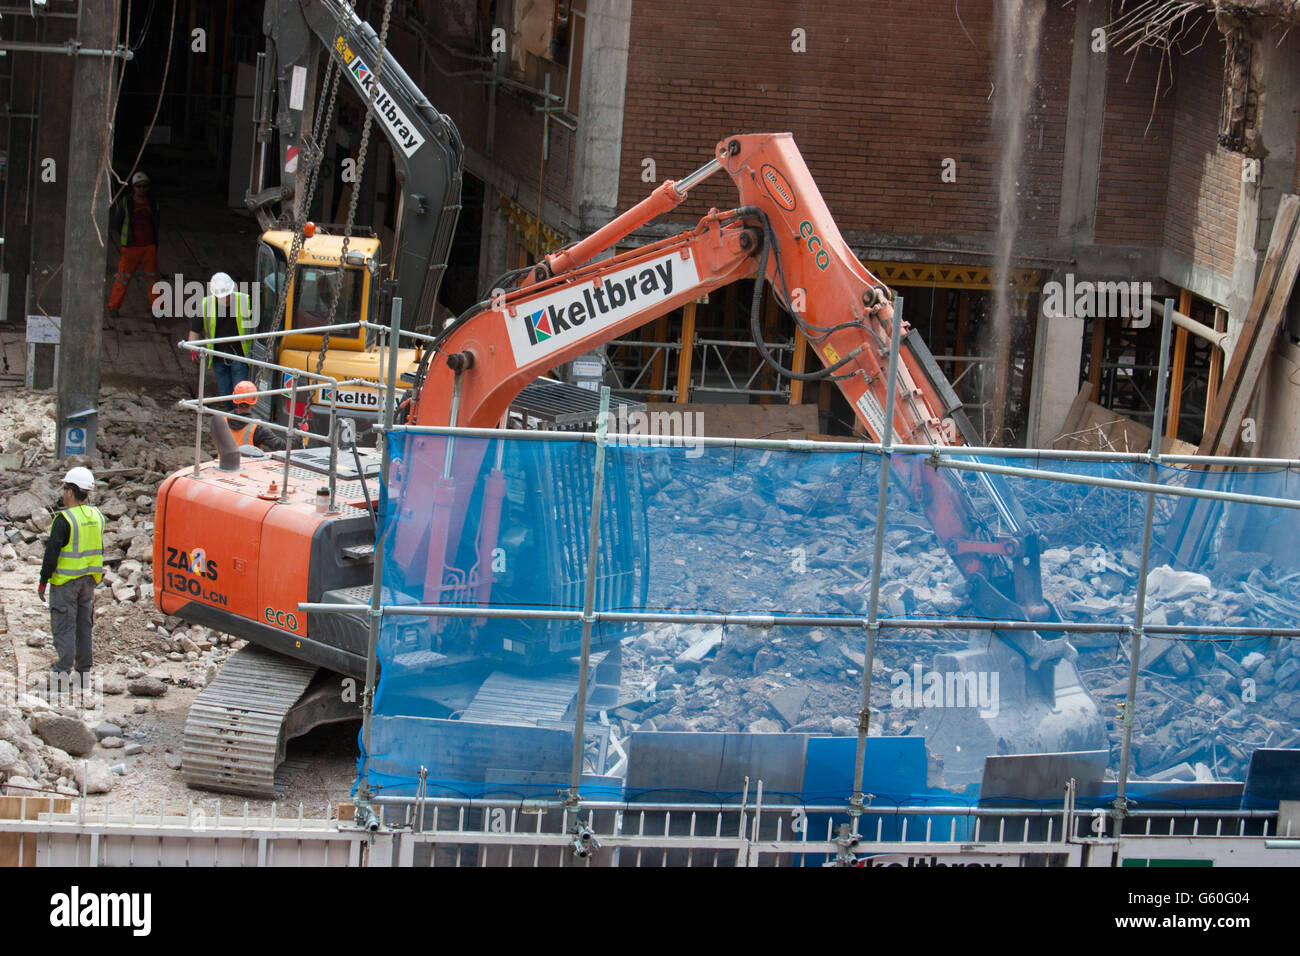 Land Securities property. Demolition on 21 Moorfield, demolition in the City, Stock Photo